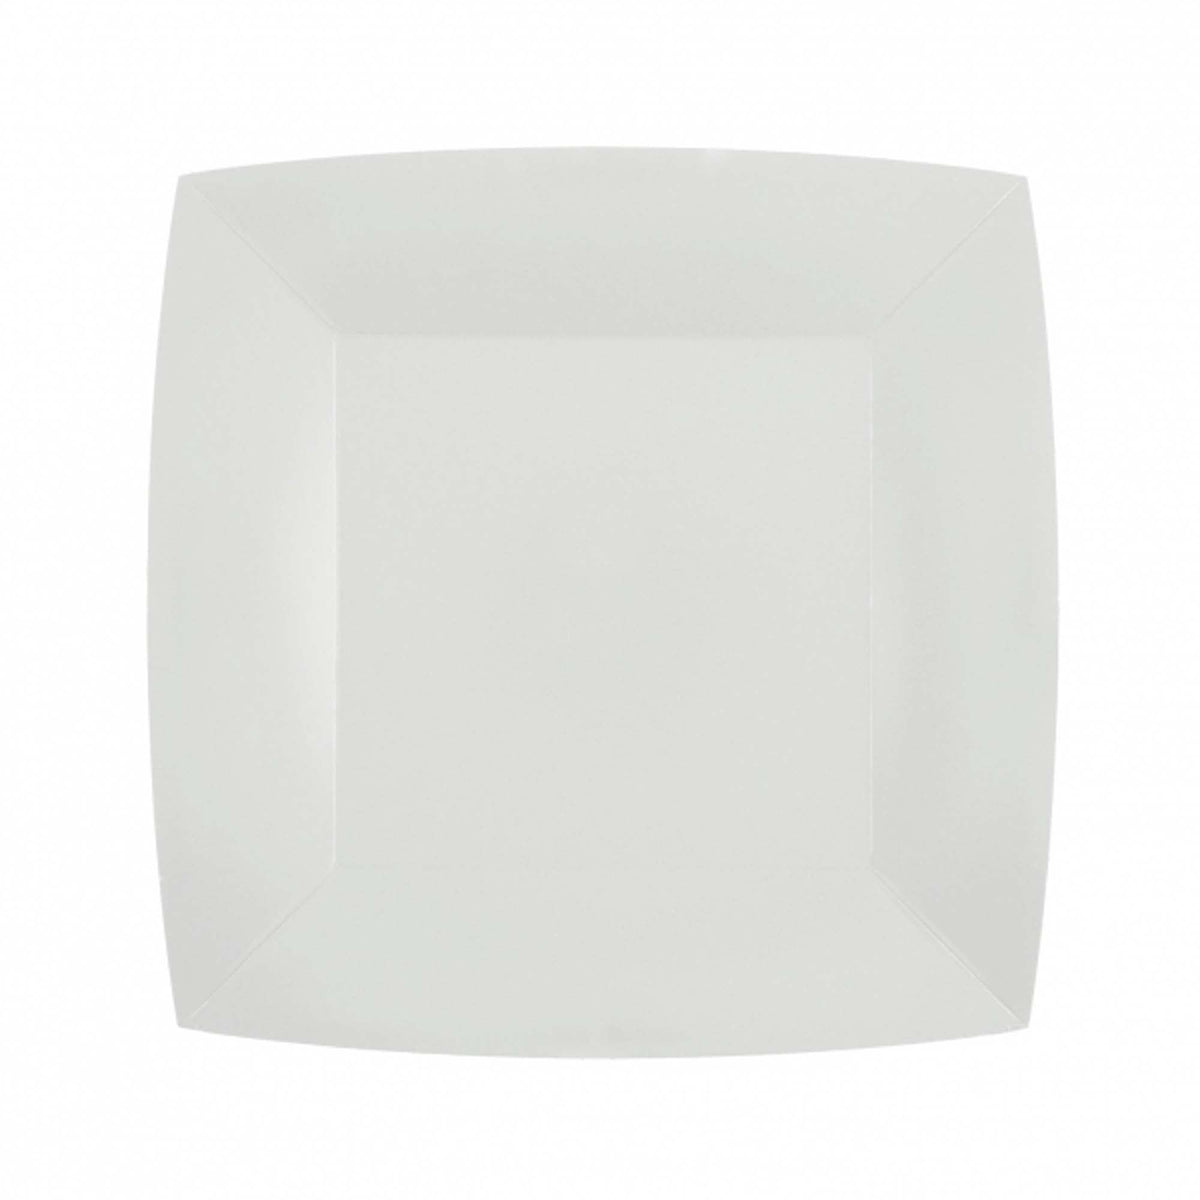 SANTEX Everyday Entertaining White Small Square Dessert Party Paper Plates, 7 Inches, 10 Count